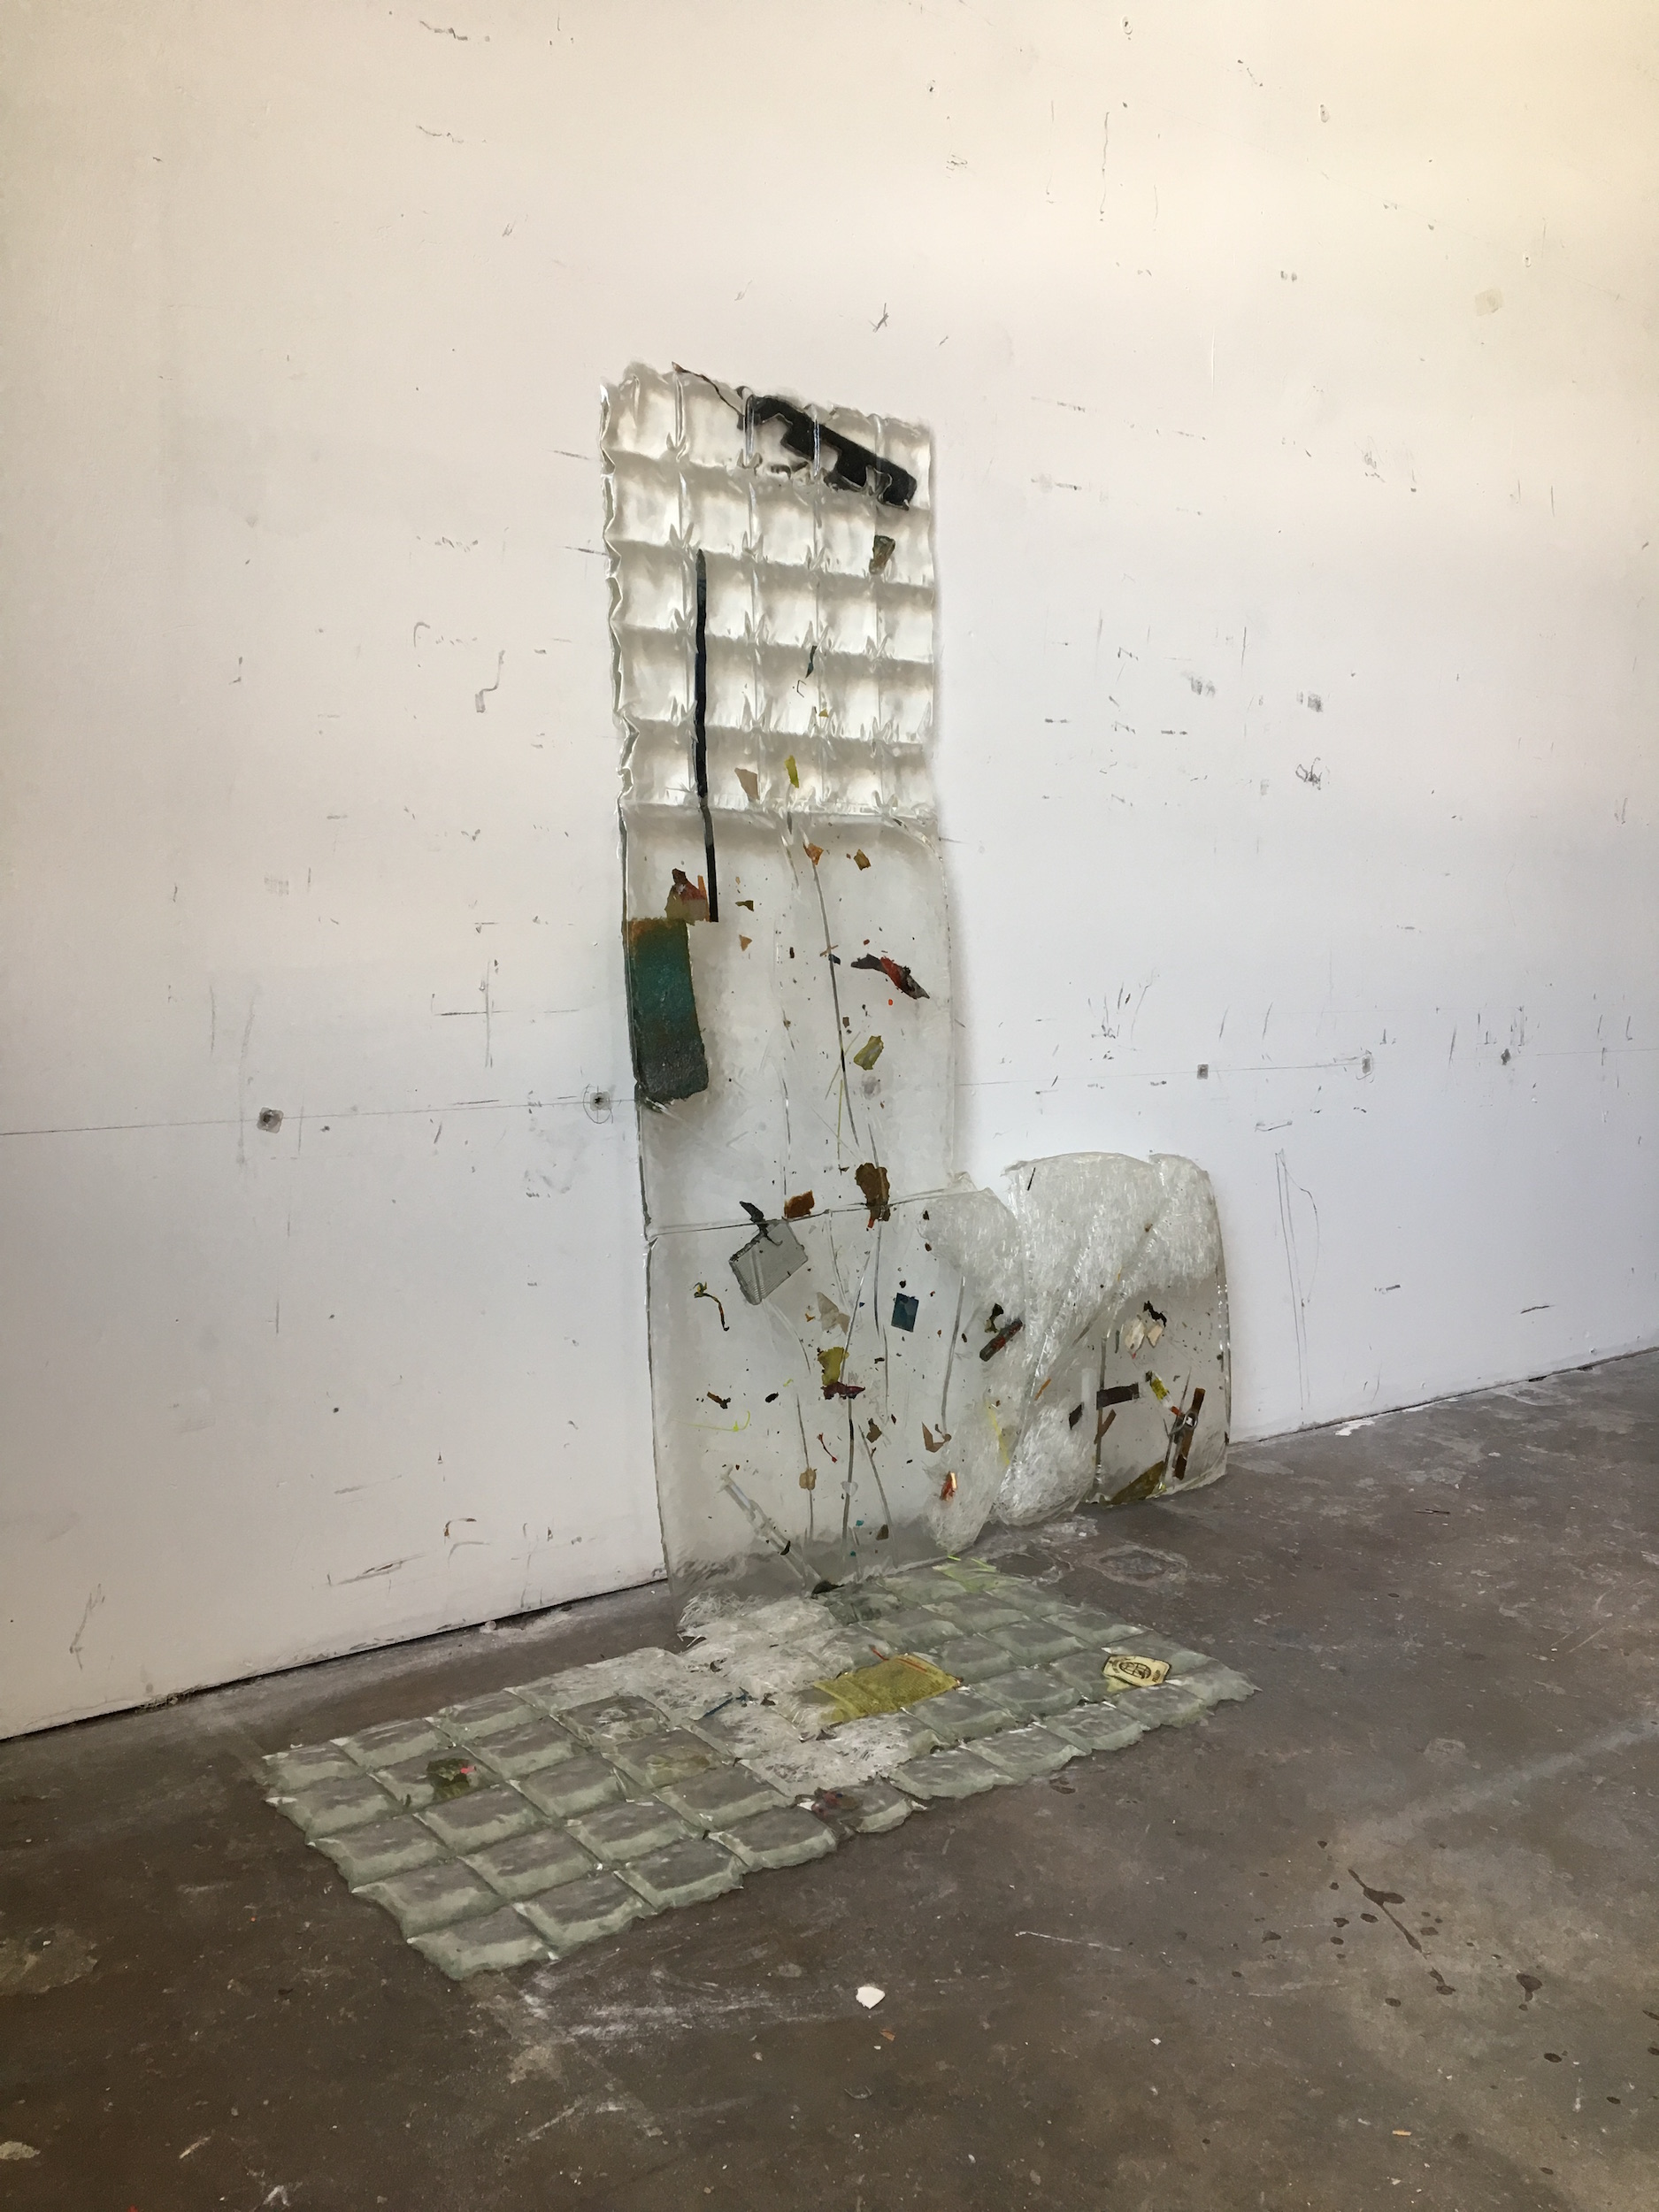  IAIN MUIRHEAD   18175,   2018. Aggregate studio sediment (2014-2018) and polyester resin. 45 x 45 x 17 inches. 